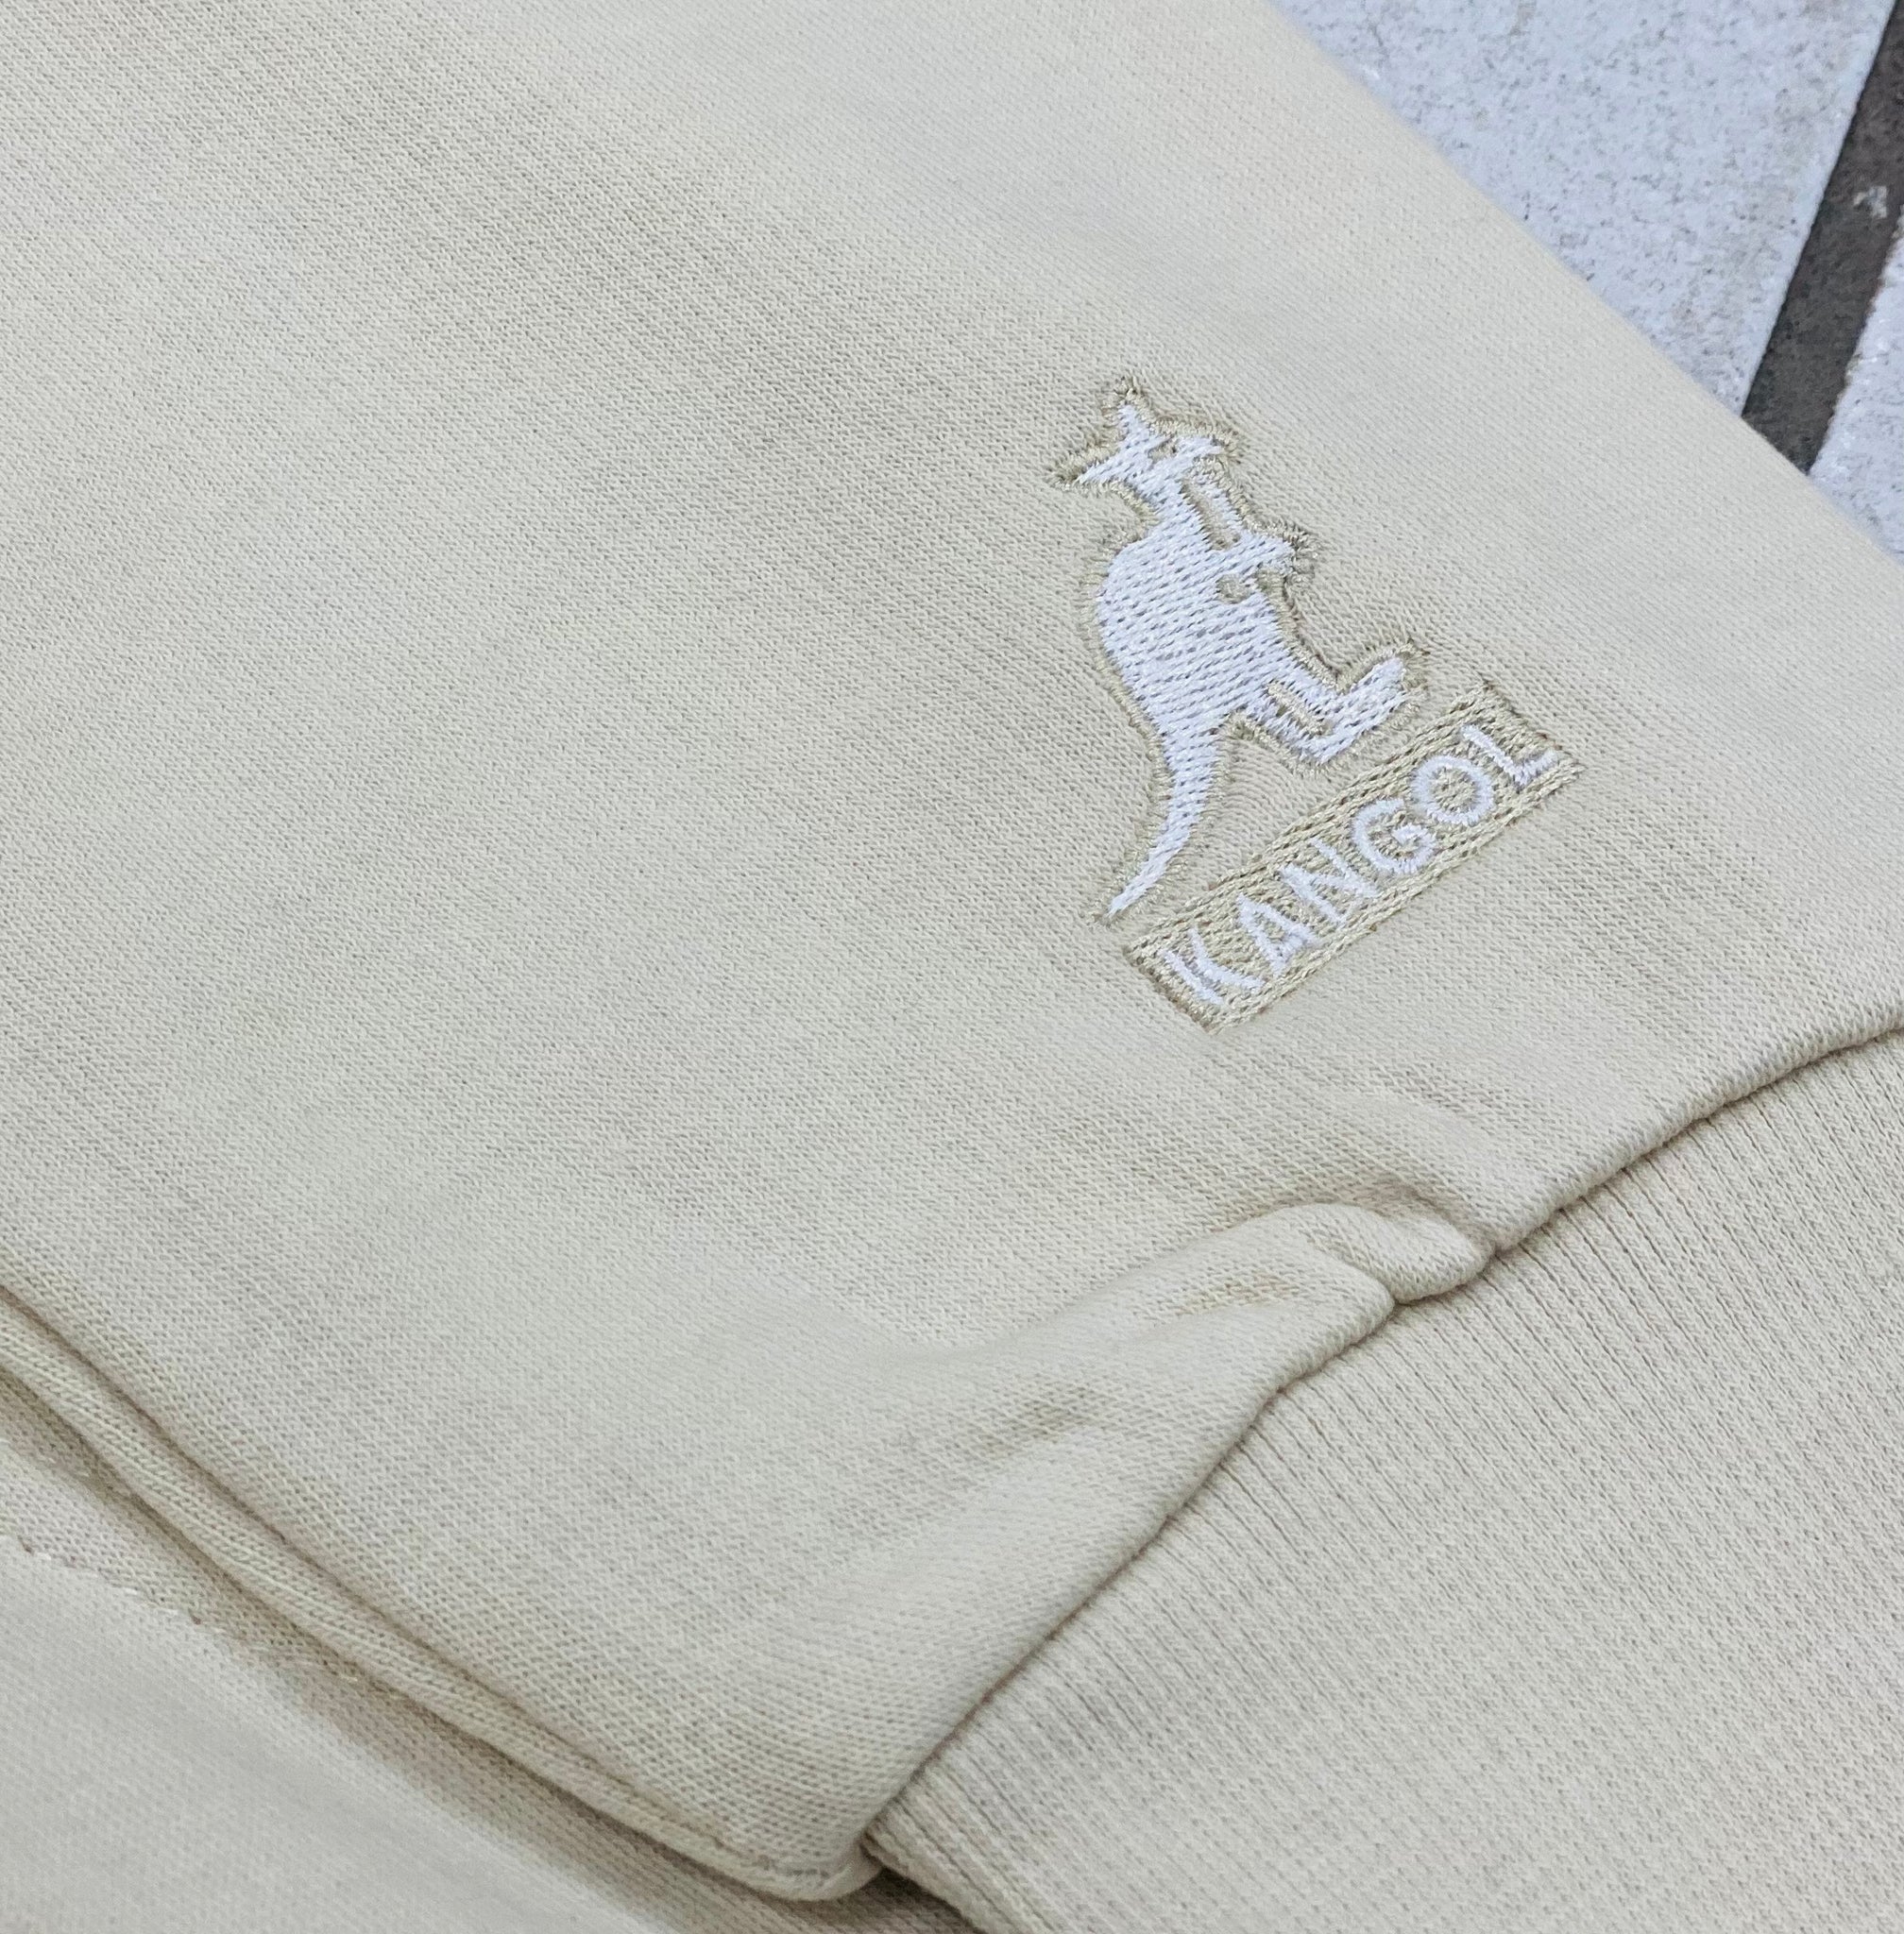 EMBROIDERED HOODY CREAM